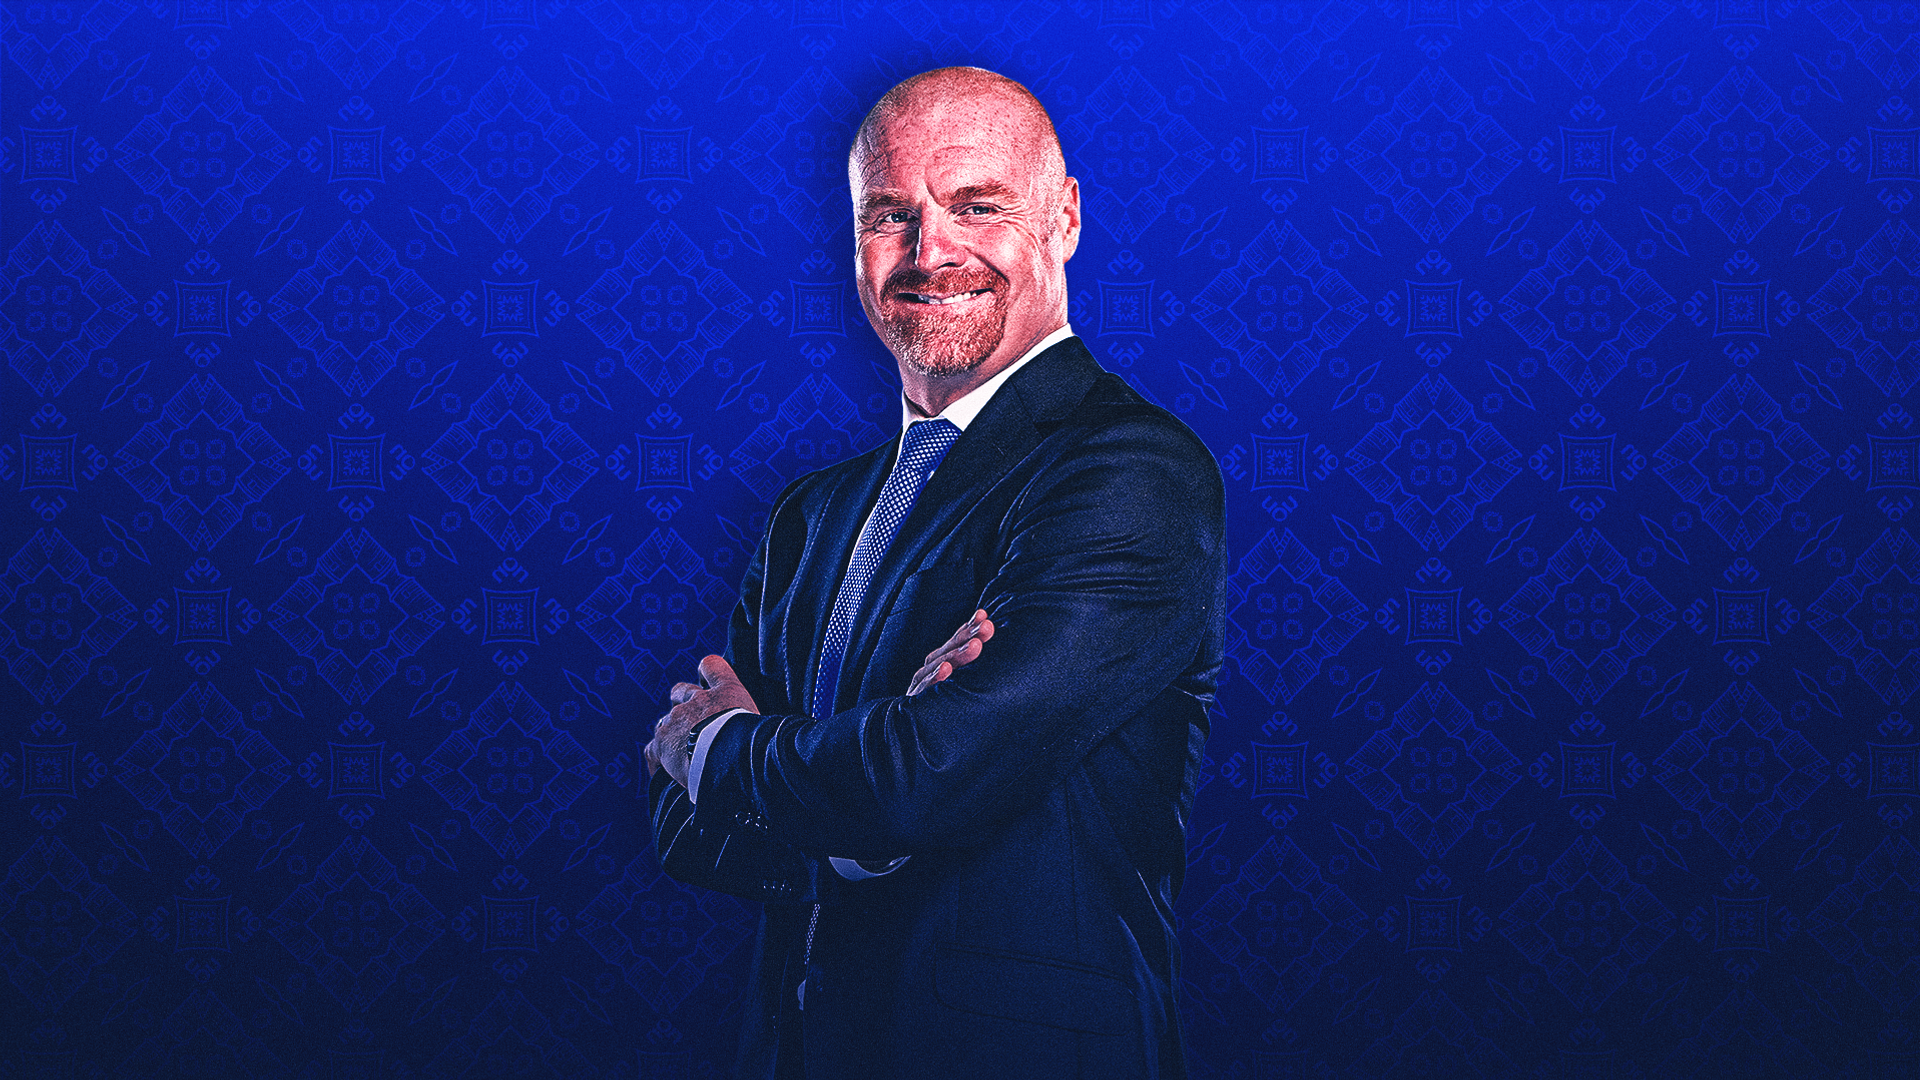 Everton confirm Dyche as manager | 'I'm ready to get this great club back on track'